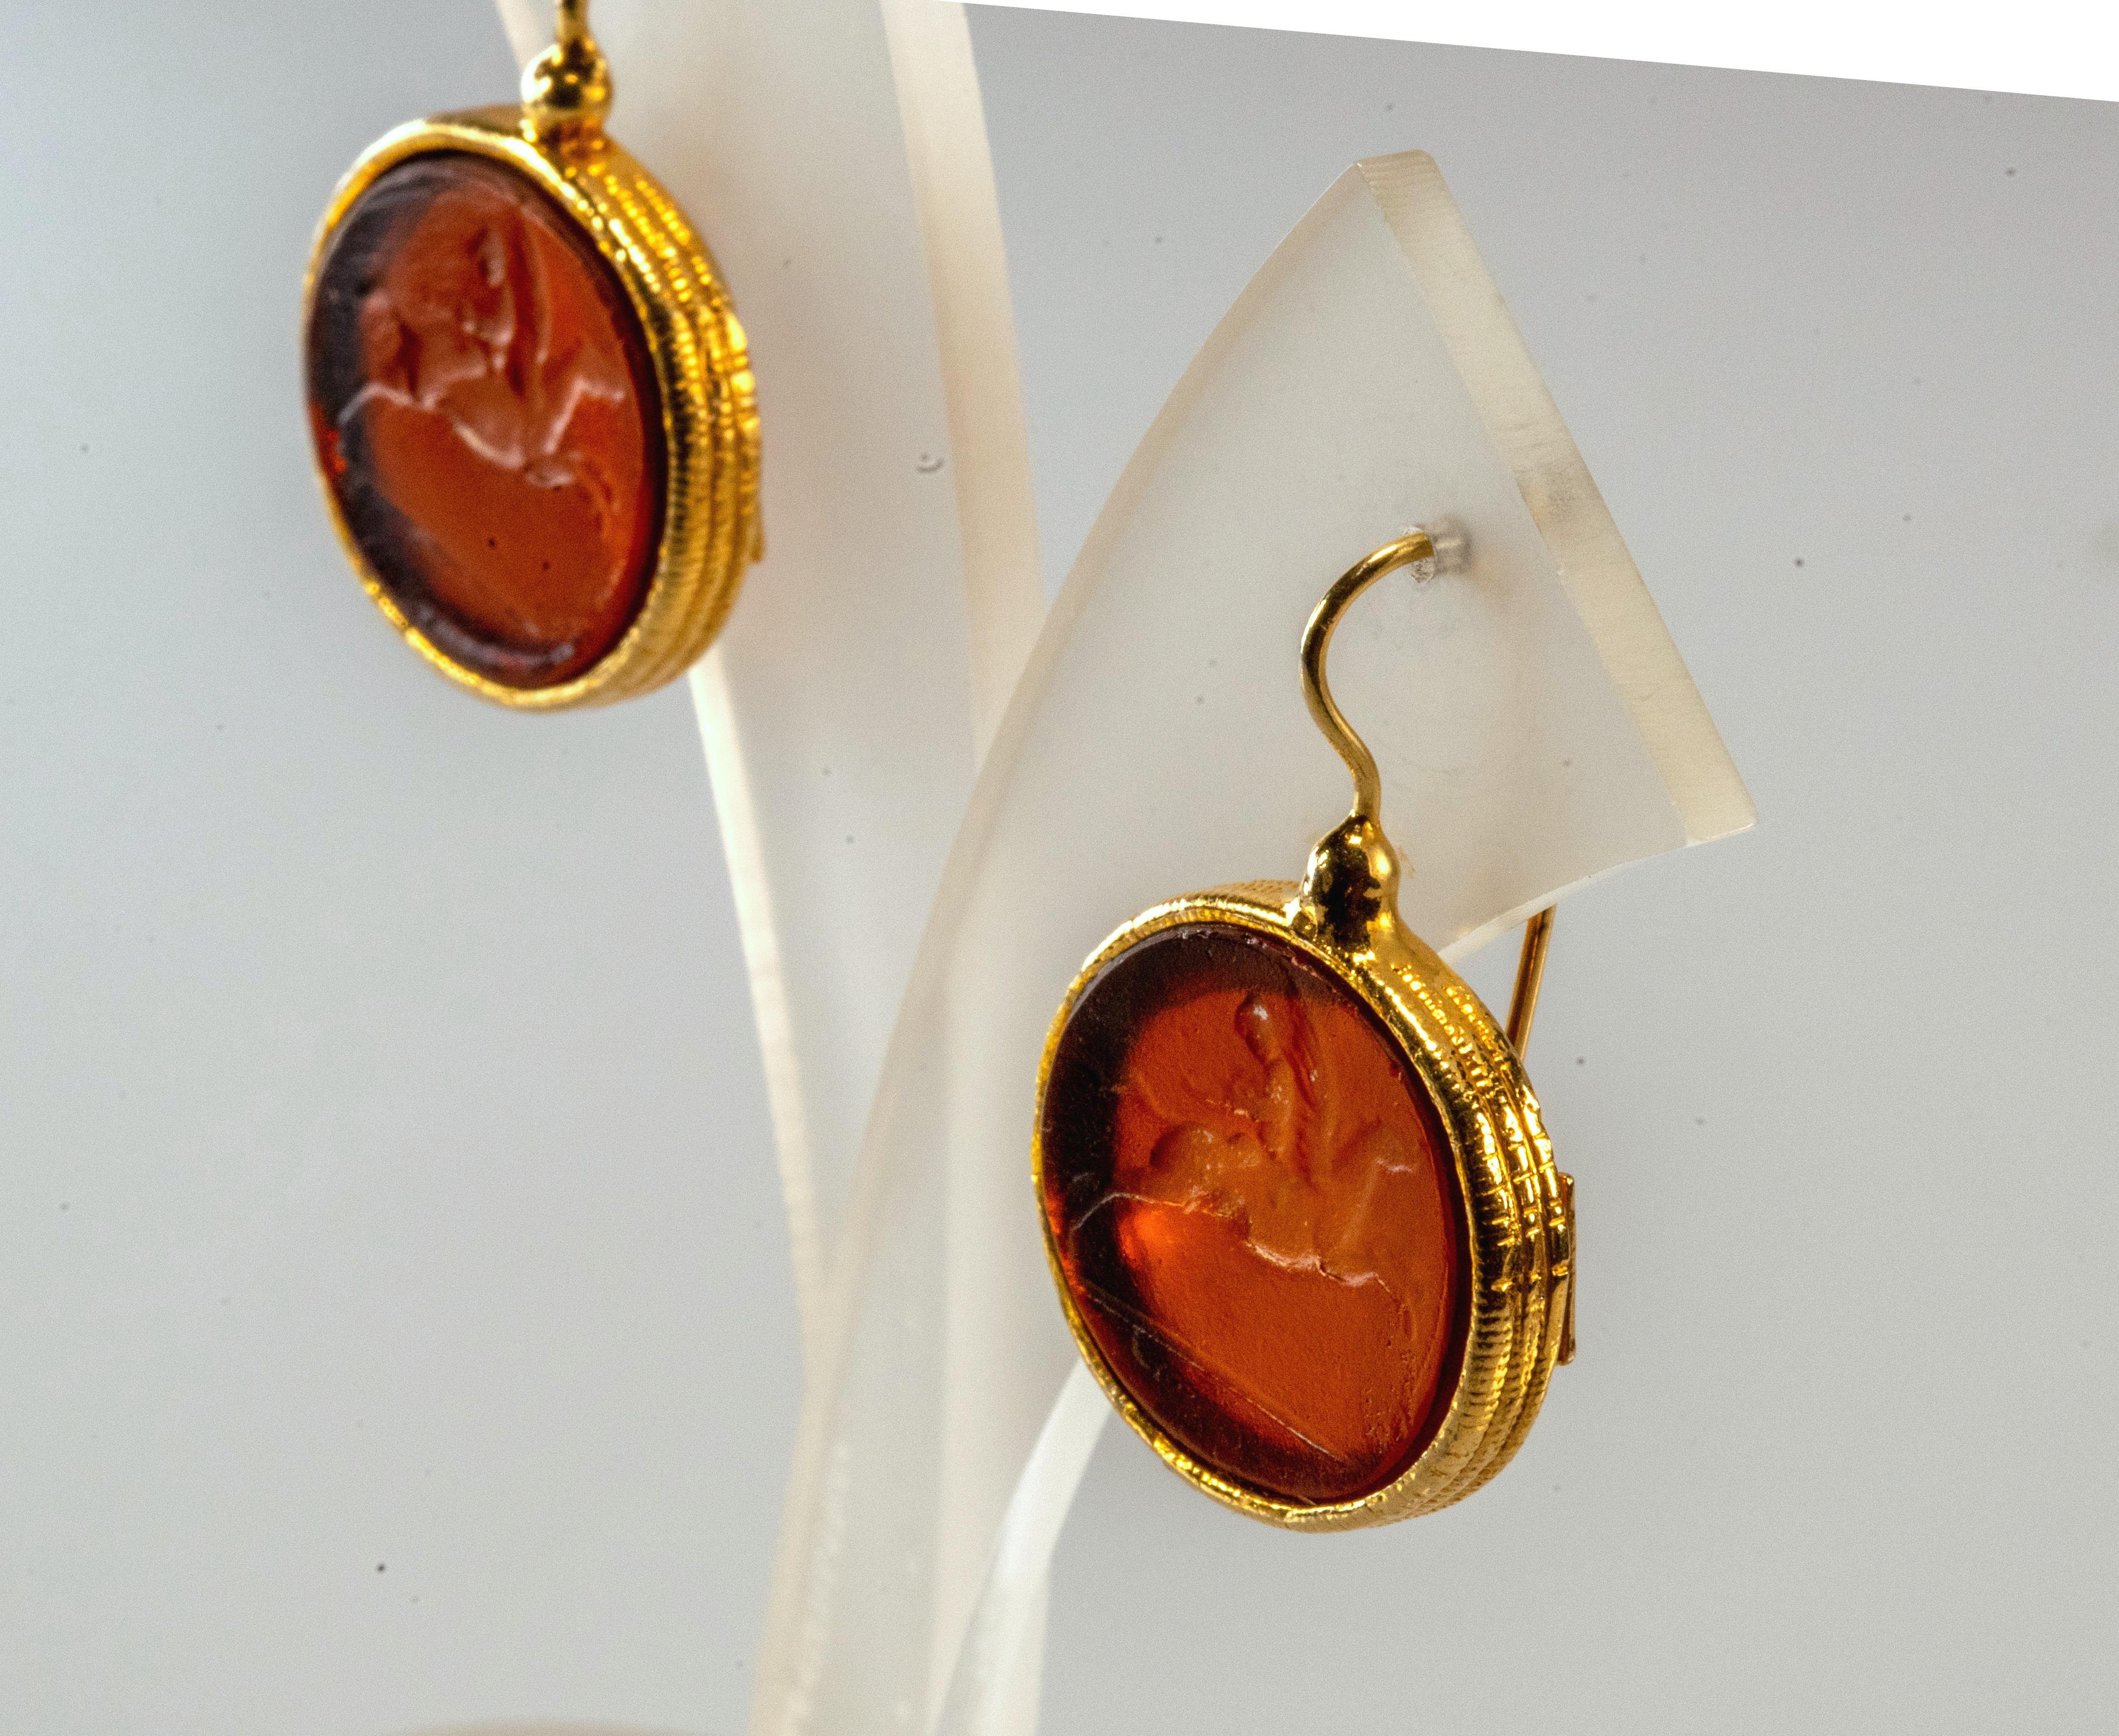 Pretty earrings in gilded 925 silver with oval cameos made of orange glass paste.
The decorative technique with which Etruscans and ancient Romans made glass paste jewels, on which they depicted scenes of everyday life or mythology, has been